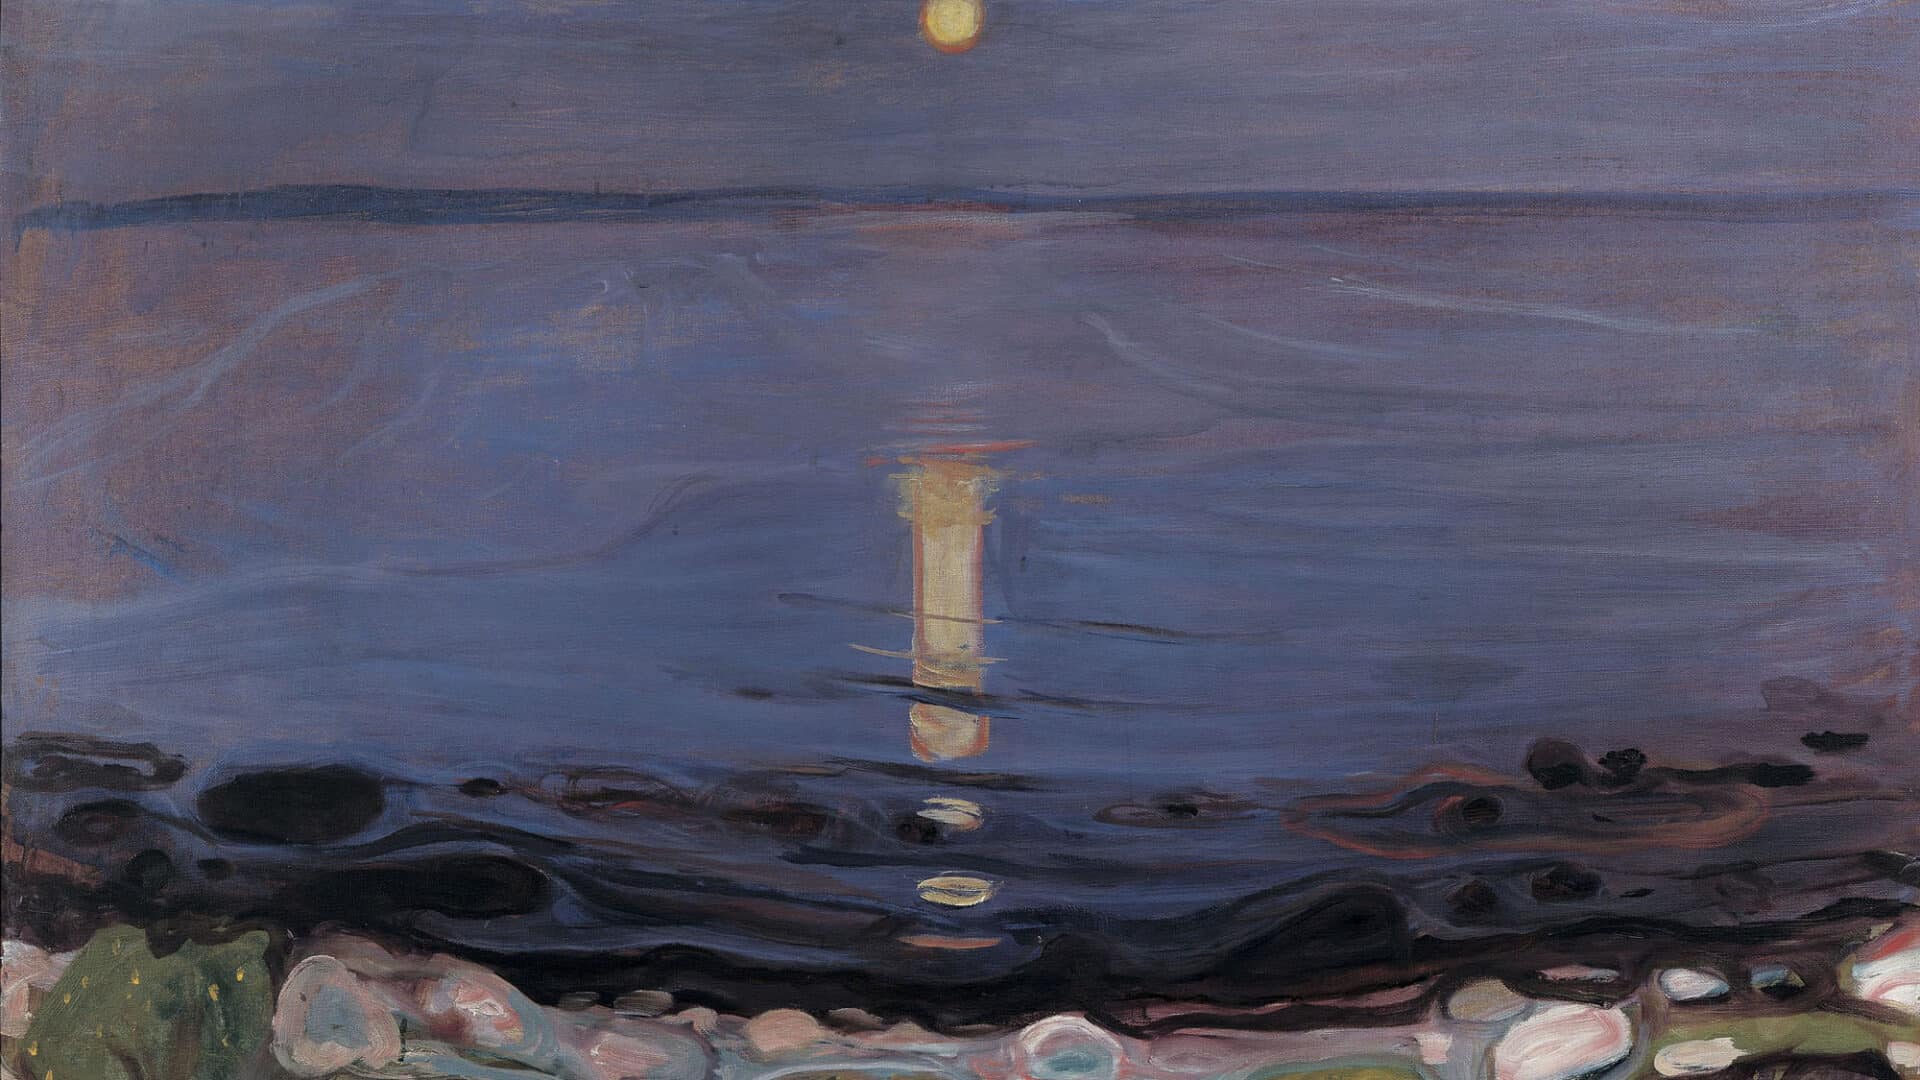 Edvard Munch, Summer Night by the Beach (detail), 1902–03, oil on canvas. Private collection, © Artists Rights Society New York